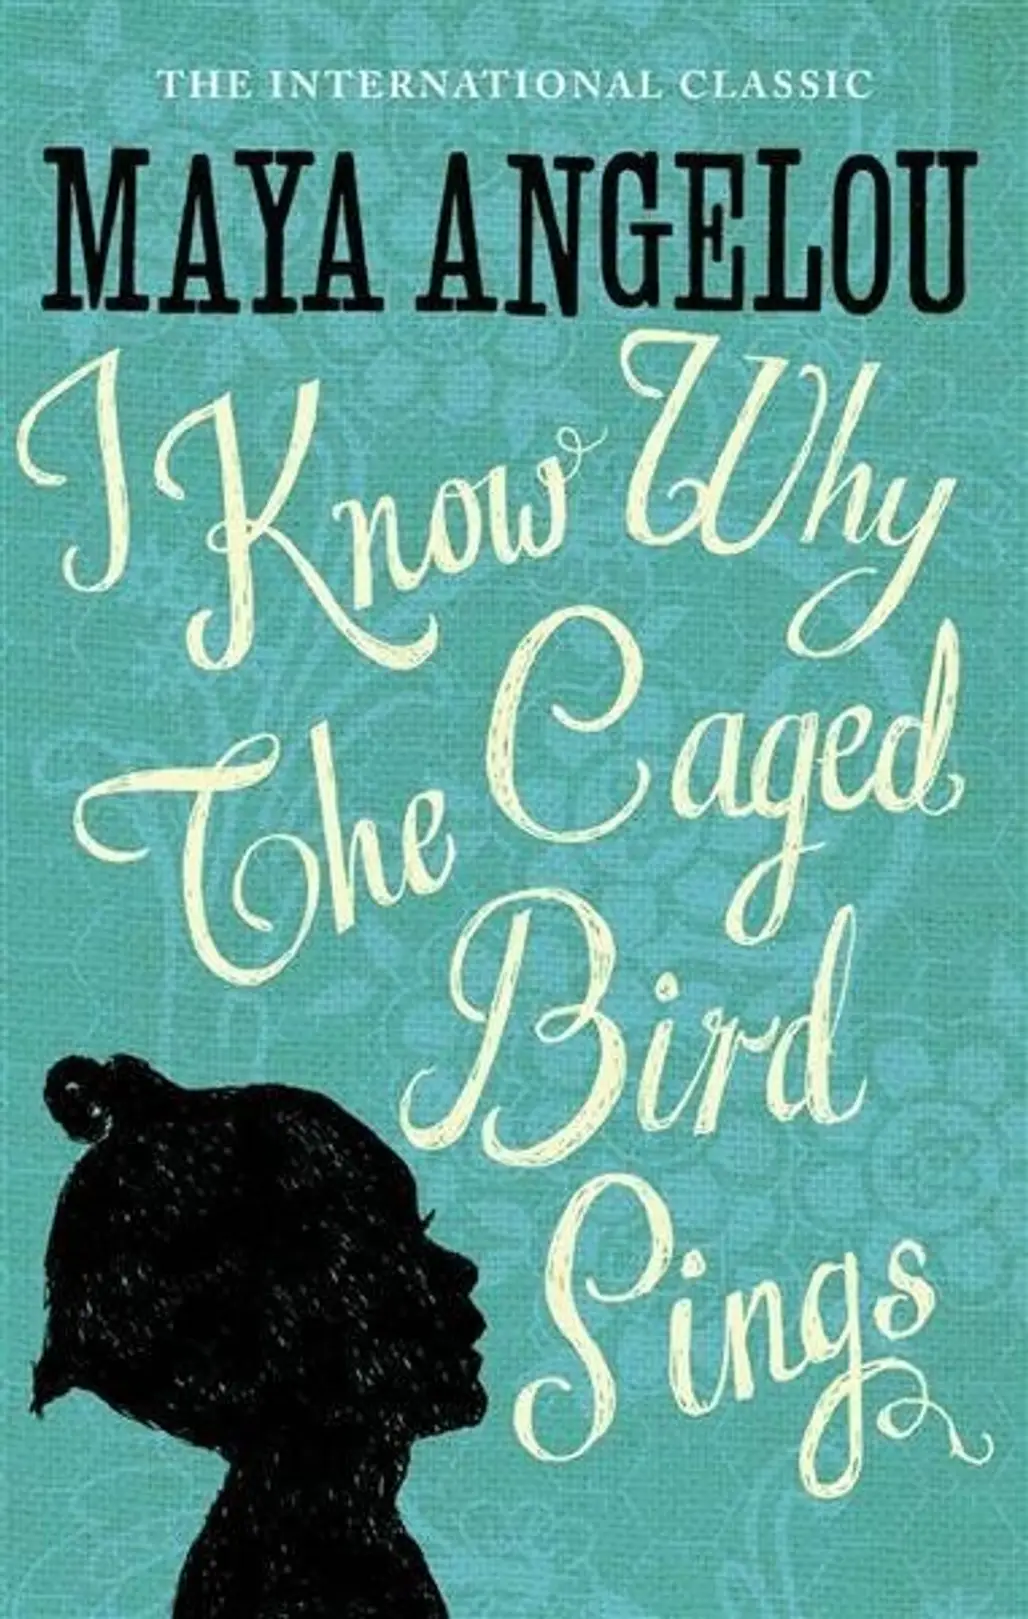 Maya Angelou- I Know Why the Caged Bird Sings